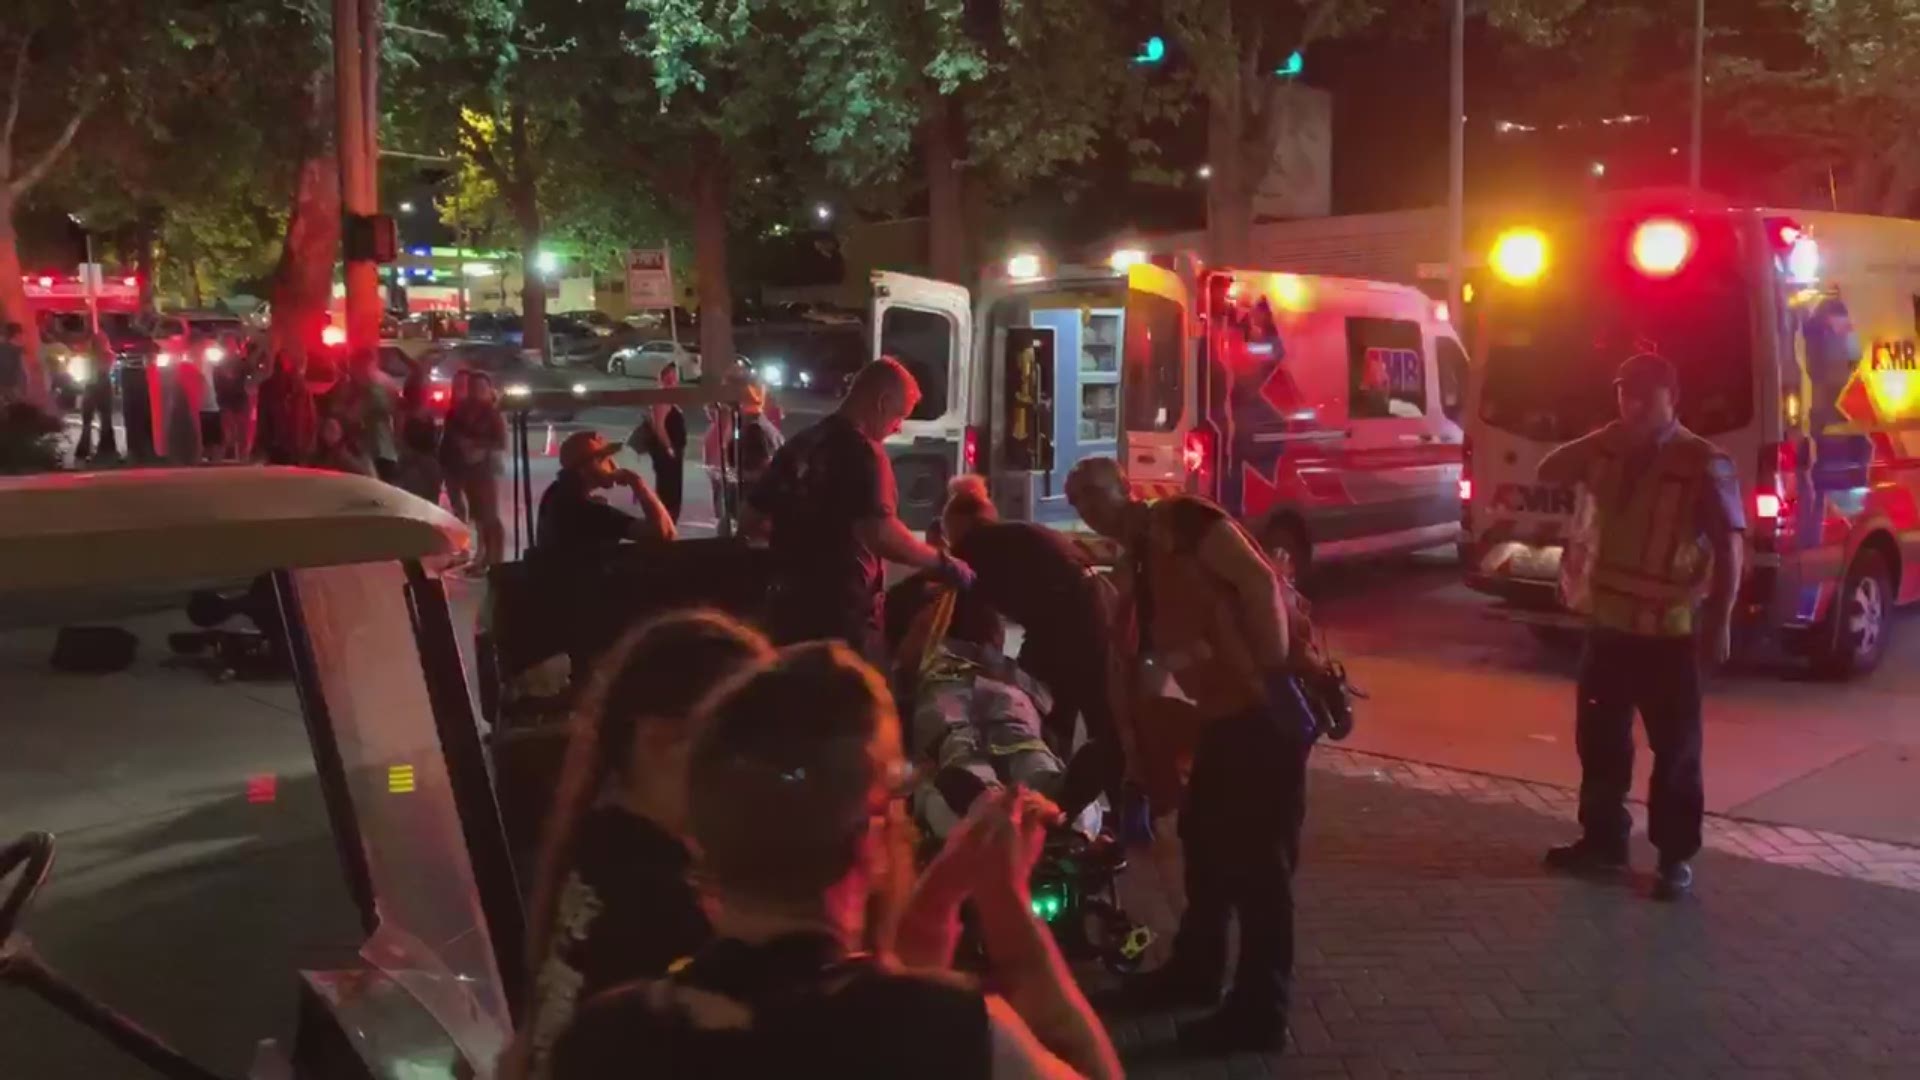 Raw video shows the scene after a stage barricade collapsed at Seattle's Bumbershoot music festival. Four people were hospitalized with minor injuries. The Seattle Fire Department said 25 people were evaluated for injuries.